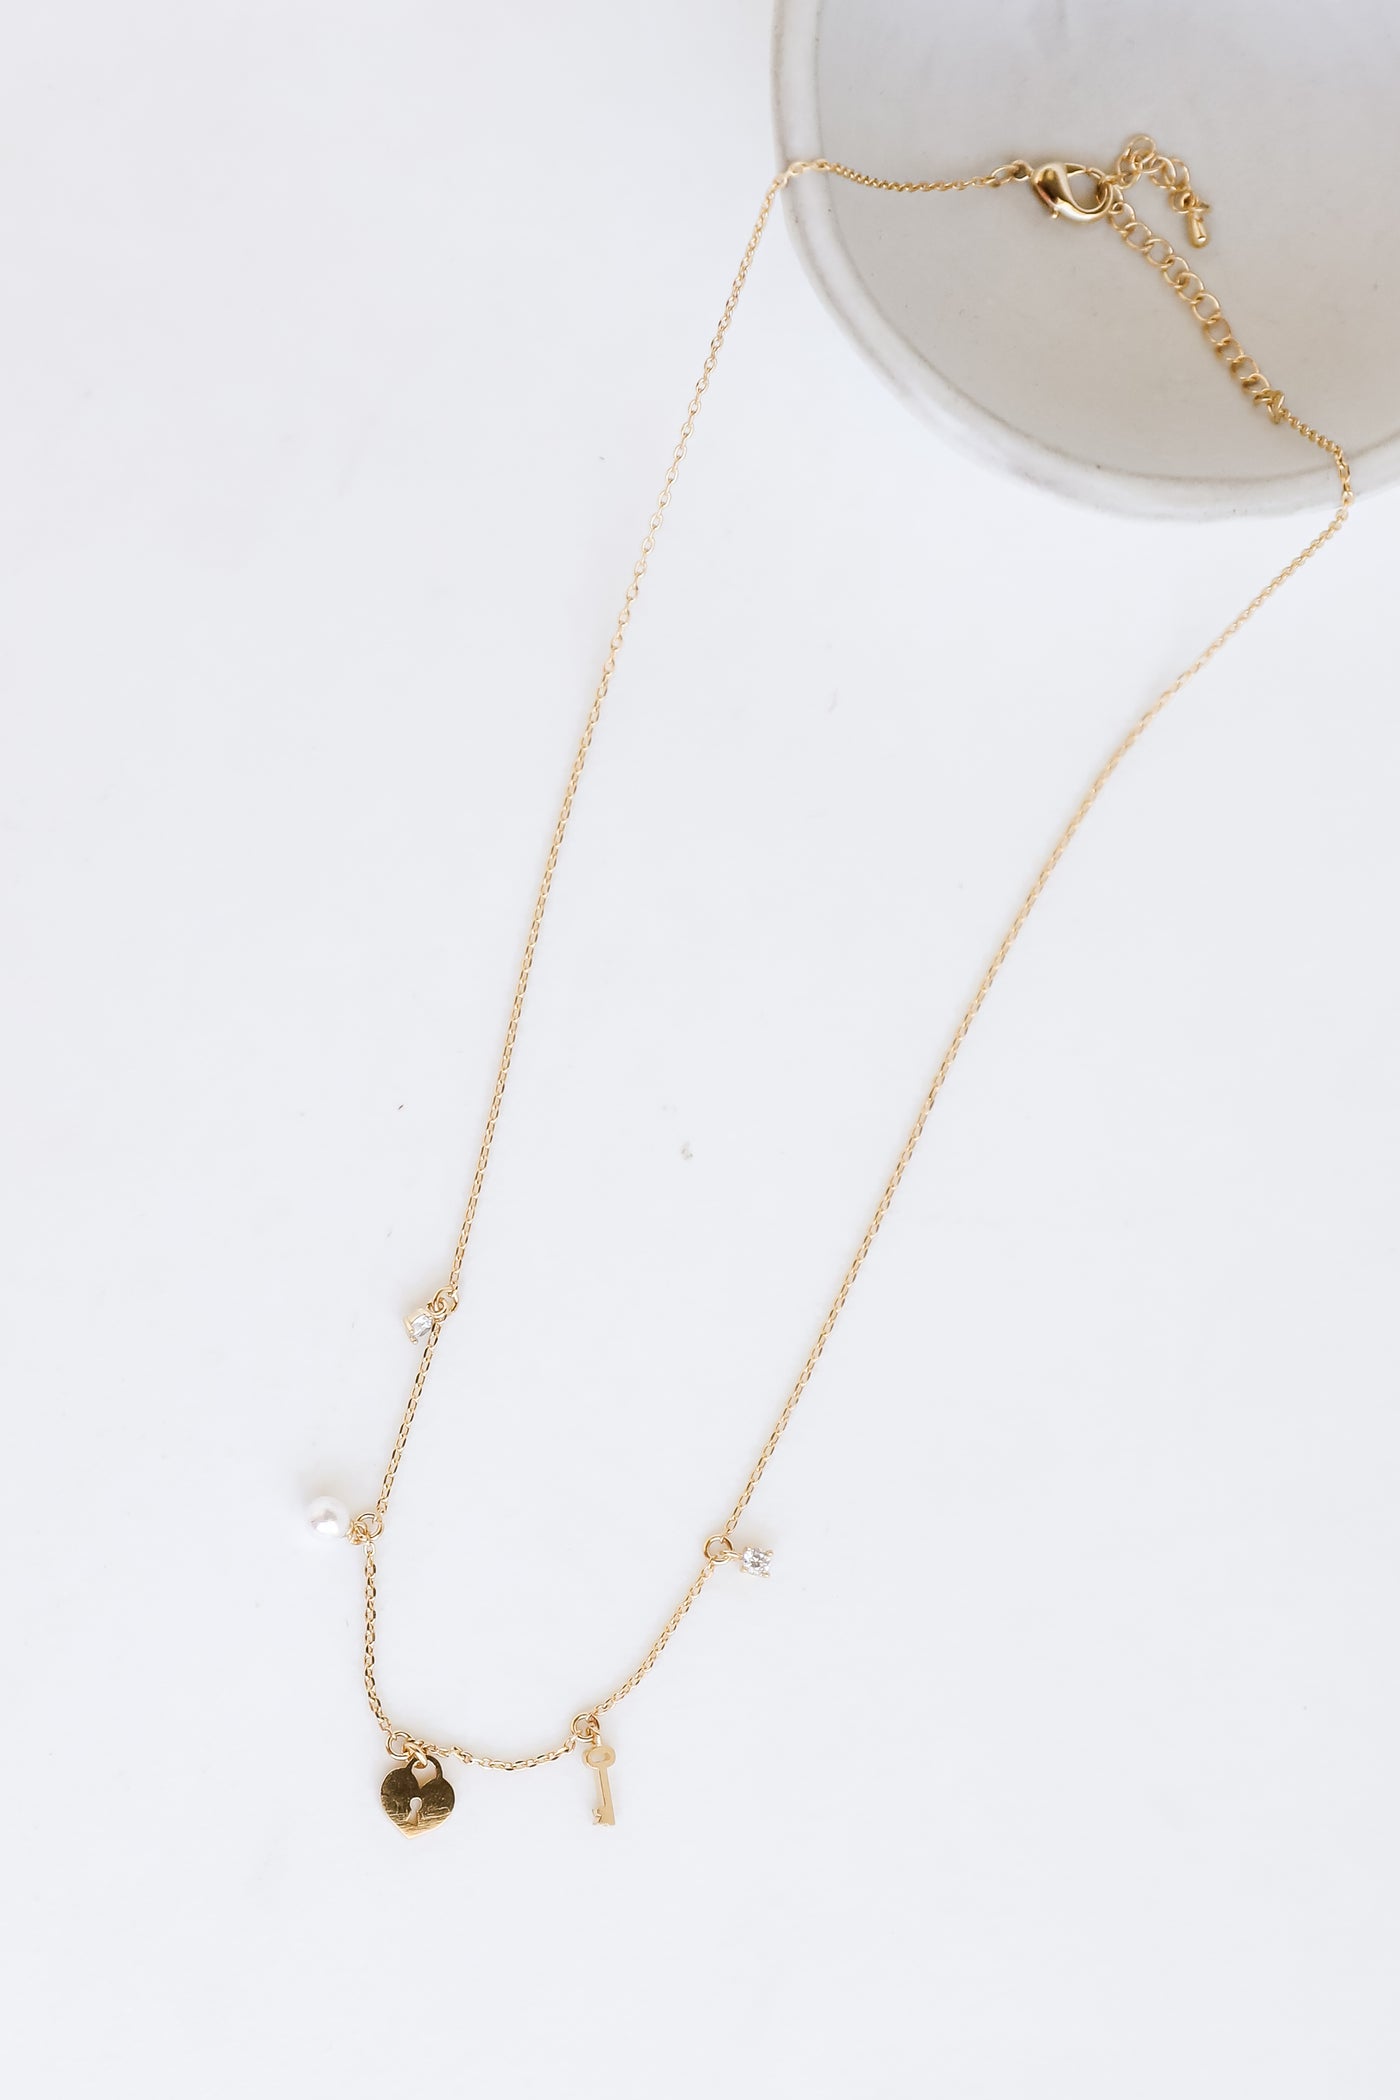 Gold Charm Necklace flat lay